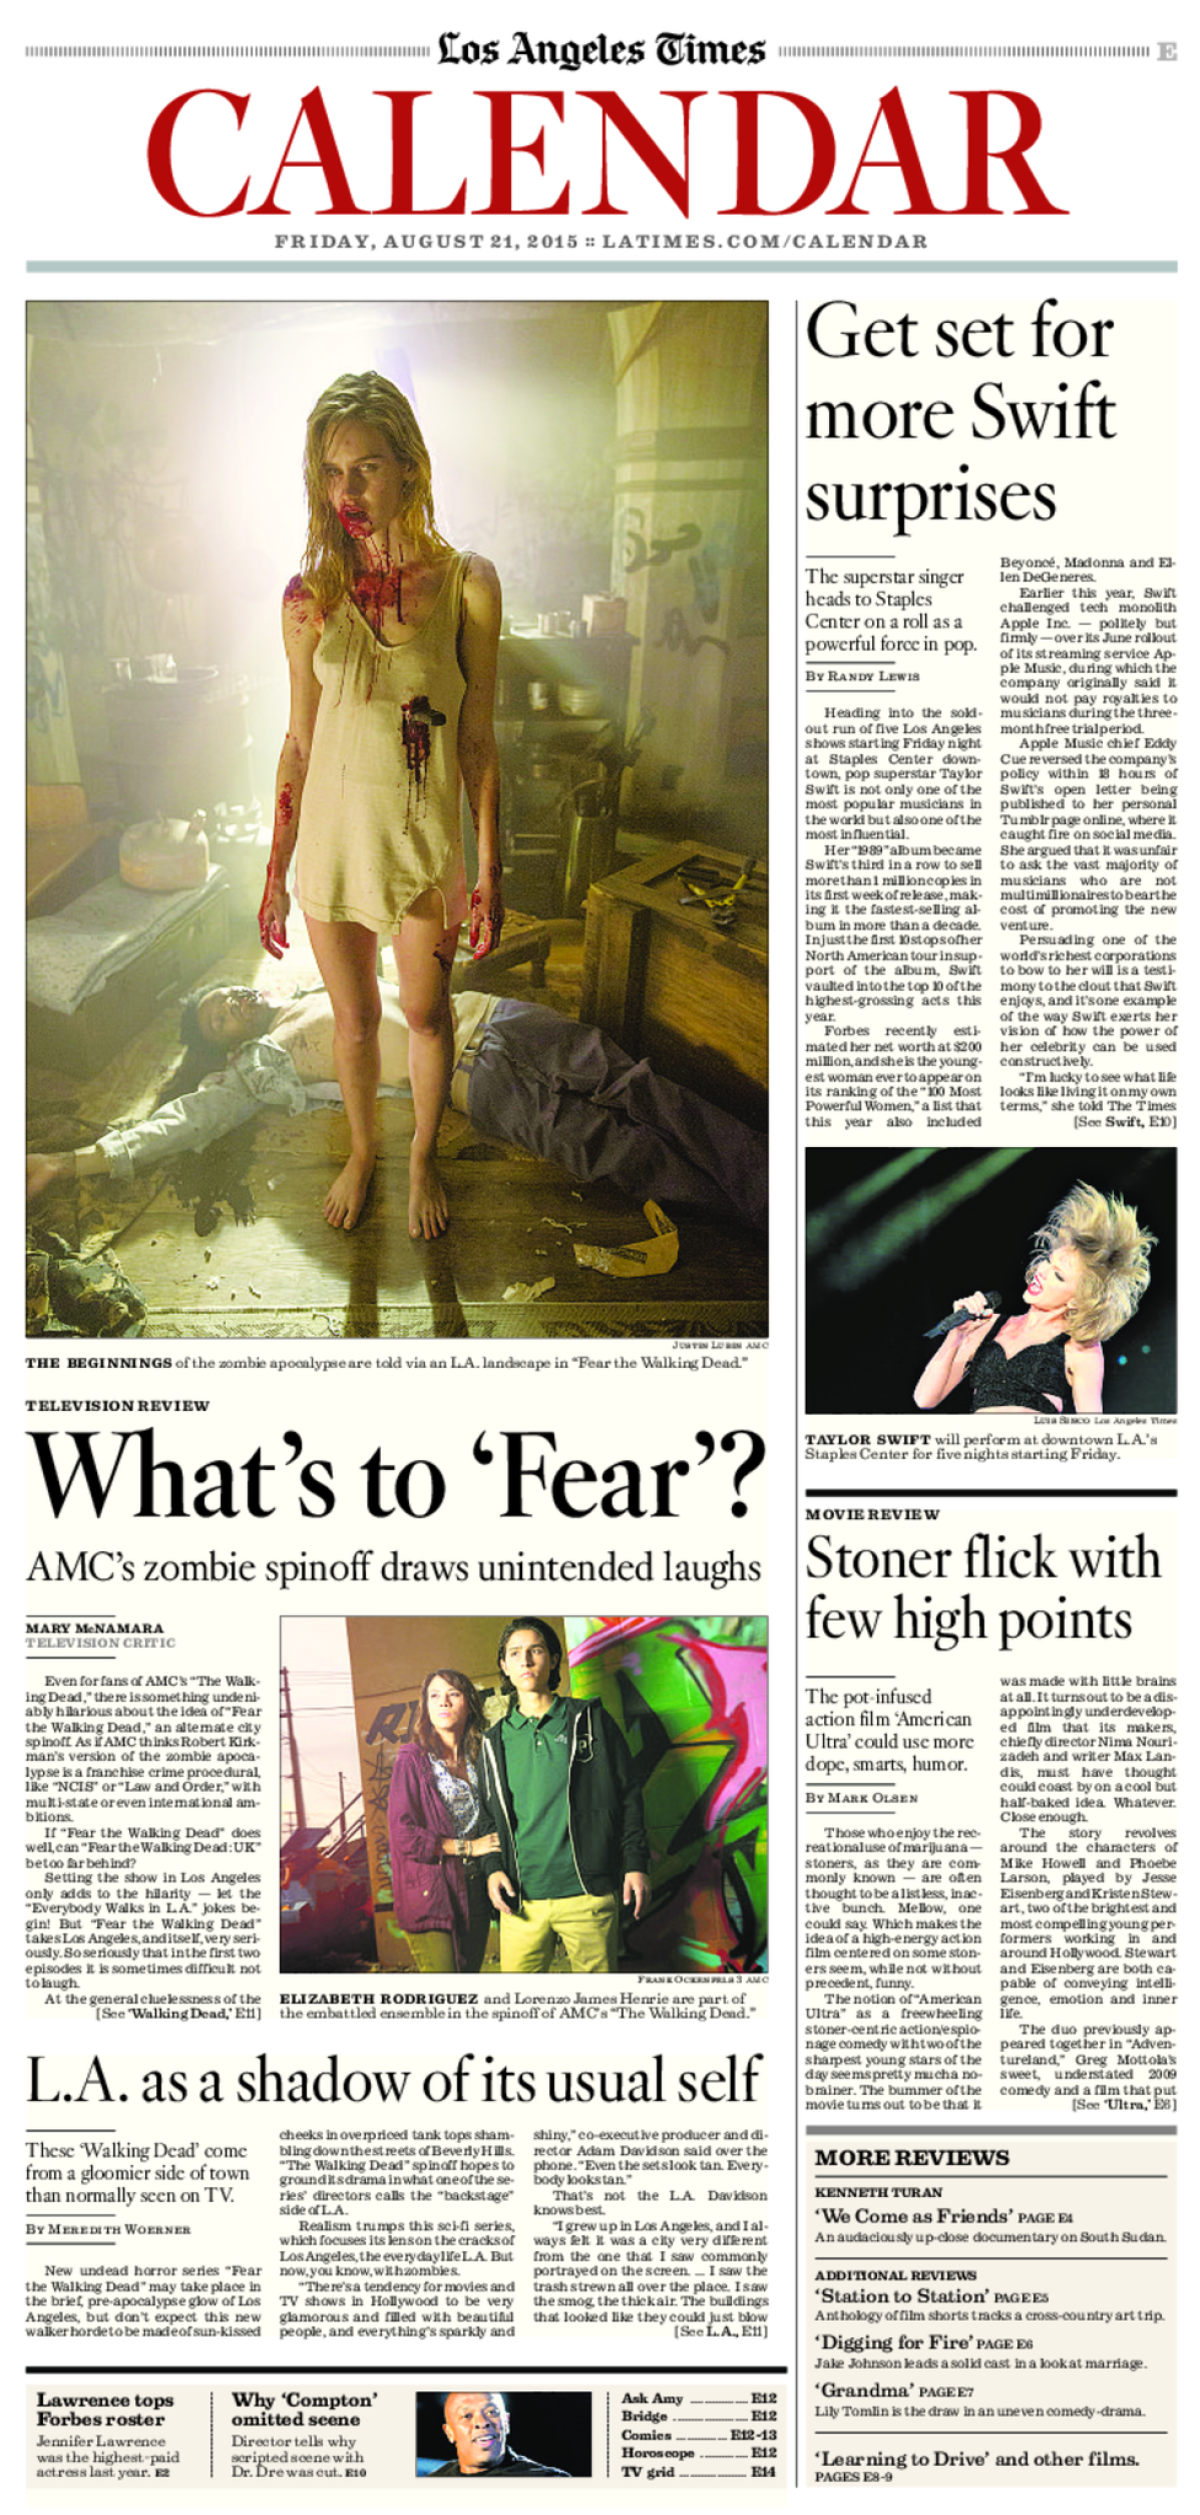 The front page